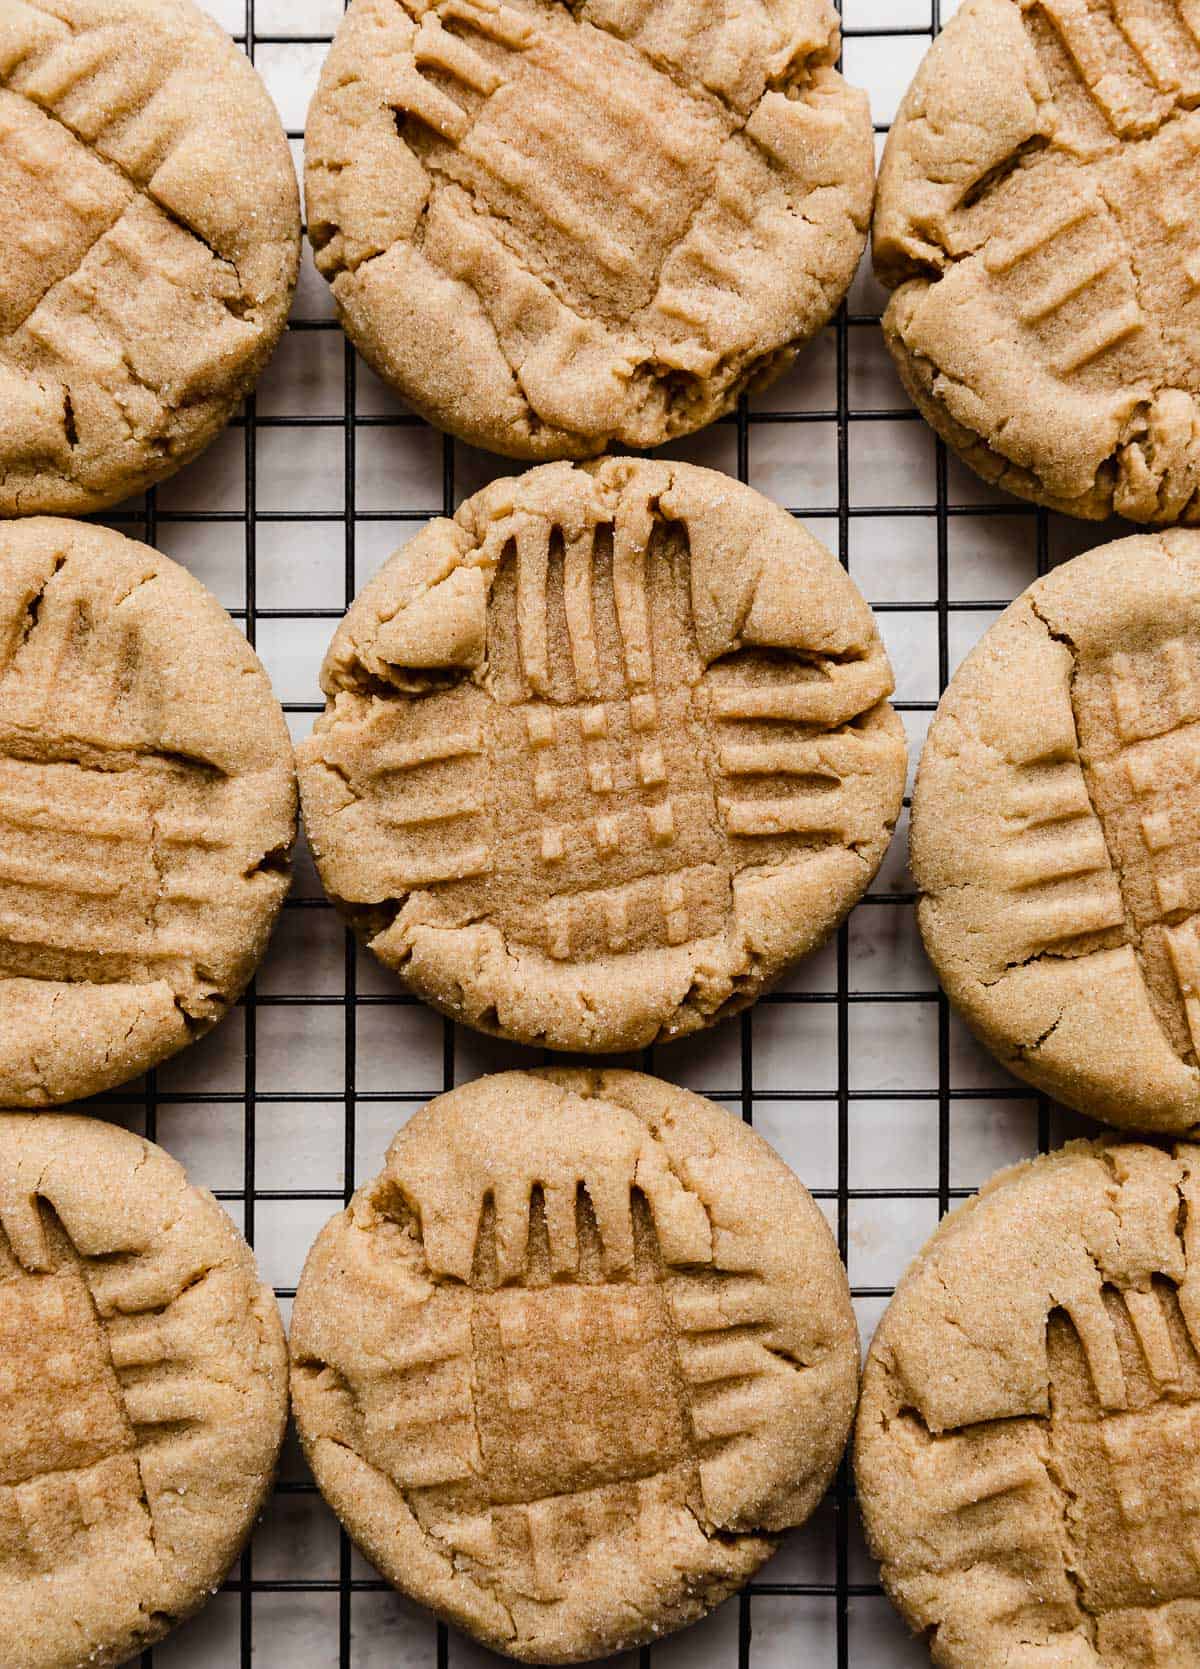 Criss cross imprinted Classic peanut butter cookies lined up on a black wire cooling rack.